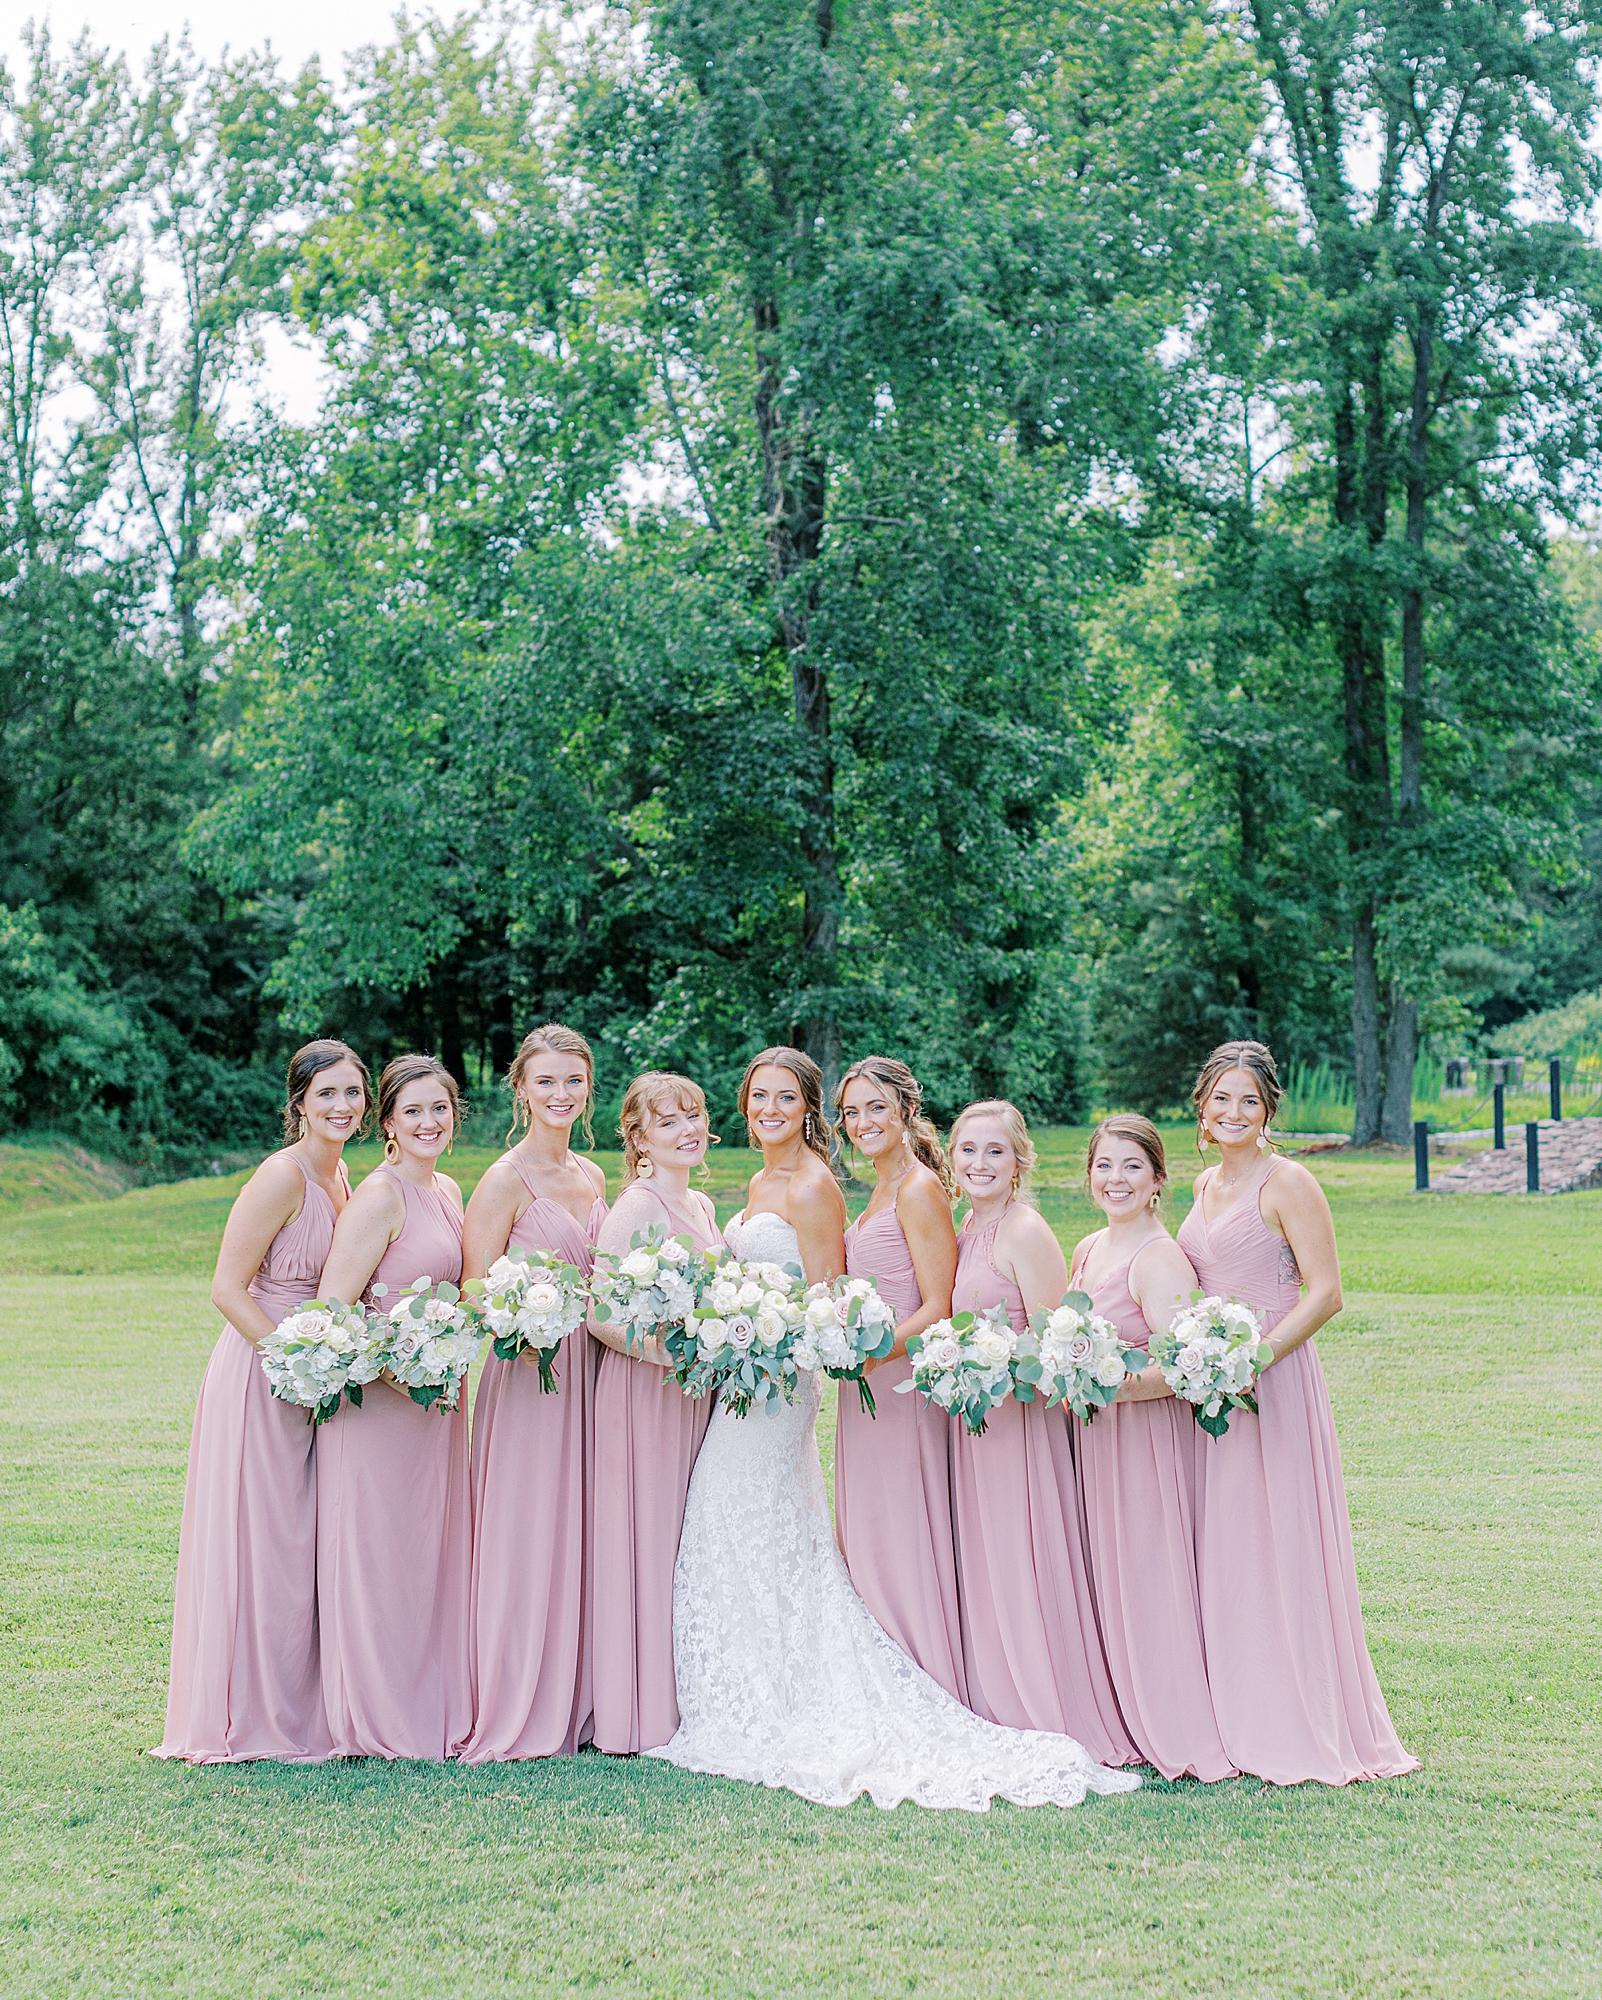 Bridesmaids holding bouquets smiling at the camera for Richmond wedding photographer at Alturia Farm.